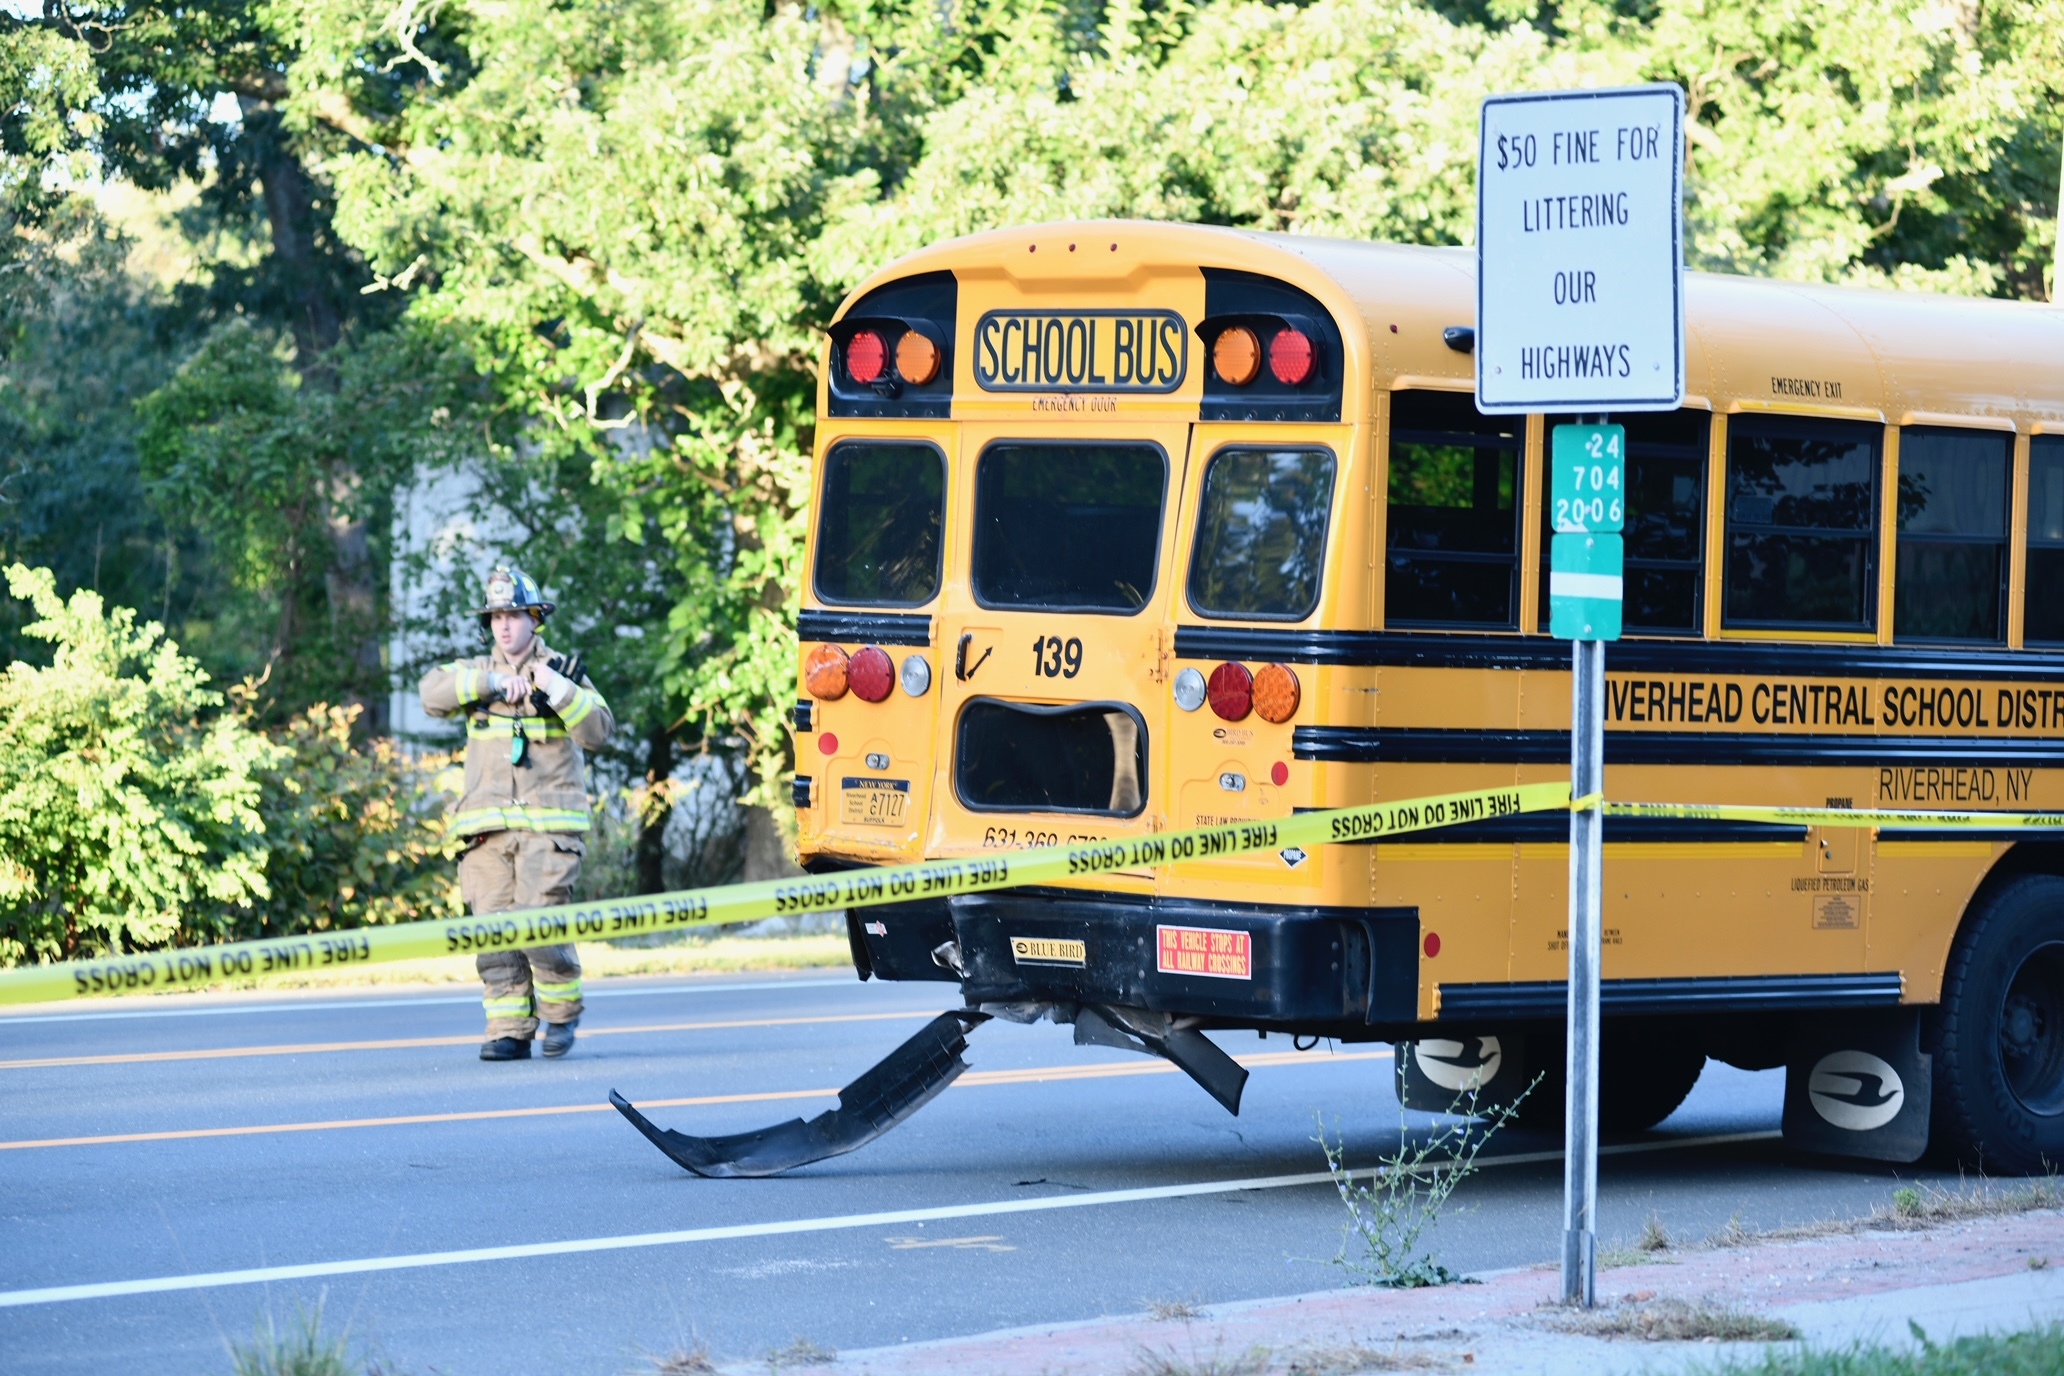 Because a school bus was involved, the call went out  to first responders as a mass casualty incident.